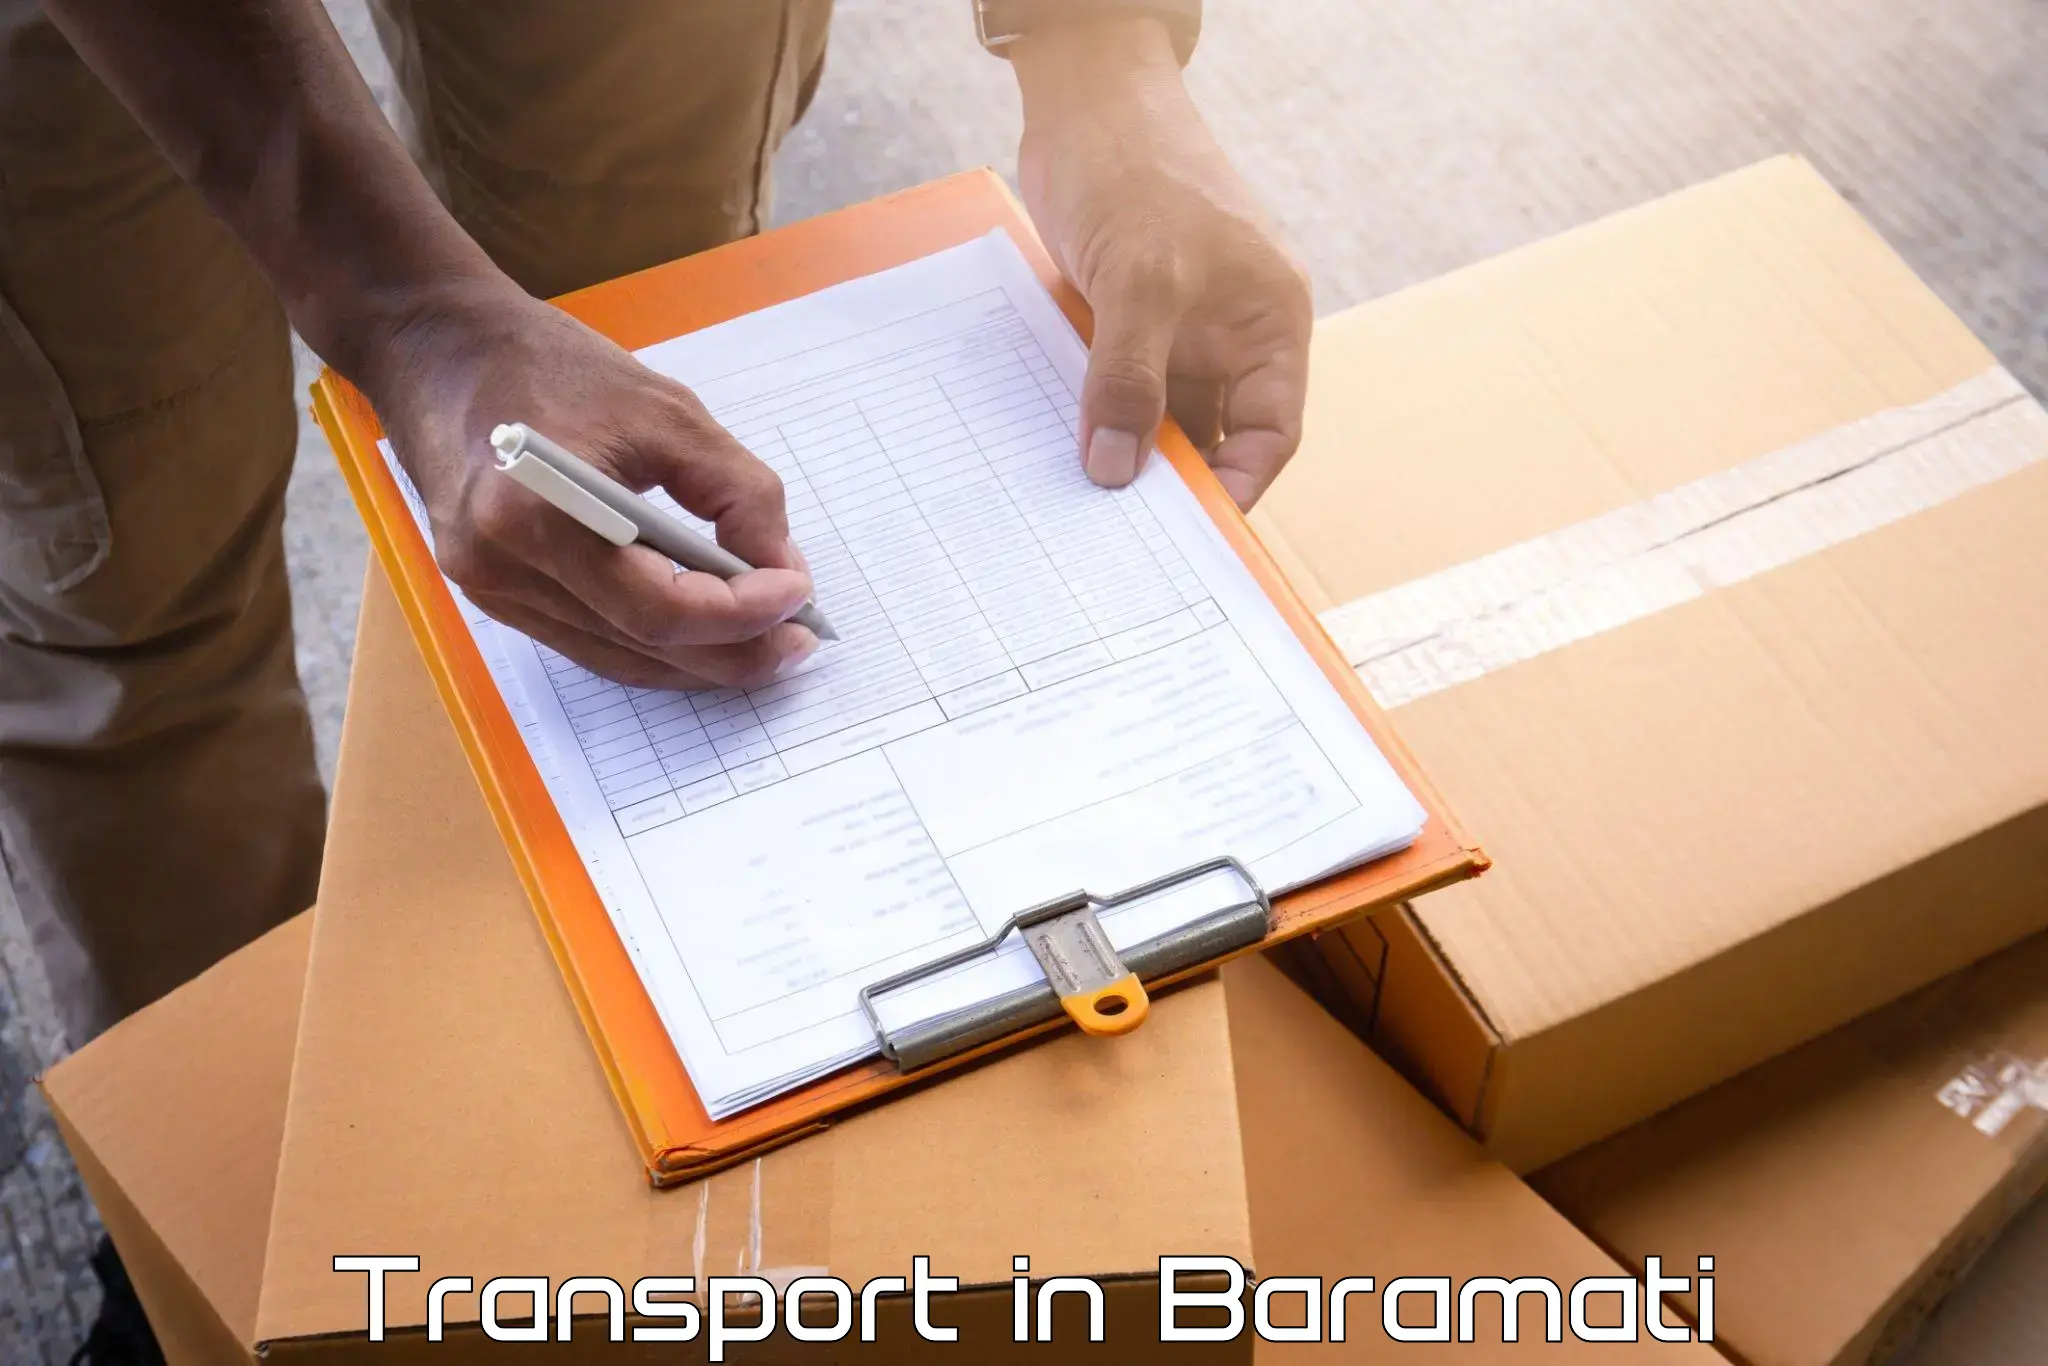 Vehicle transport services in Baramati